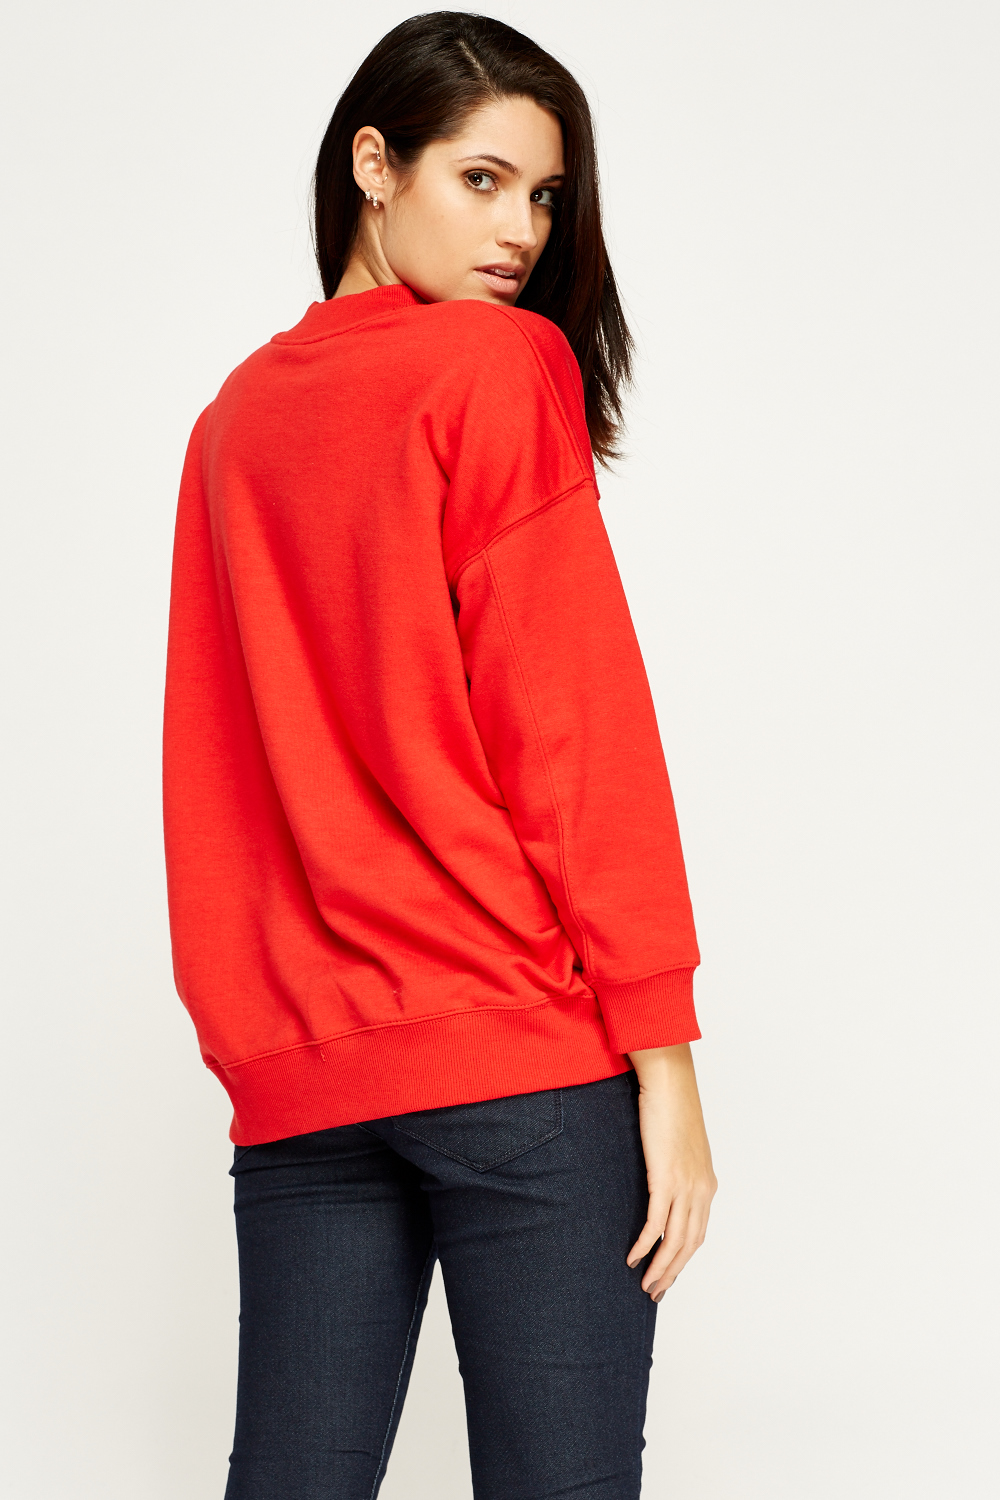 Batwing Red Jumper - Just $7